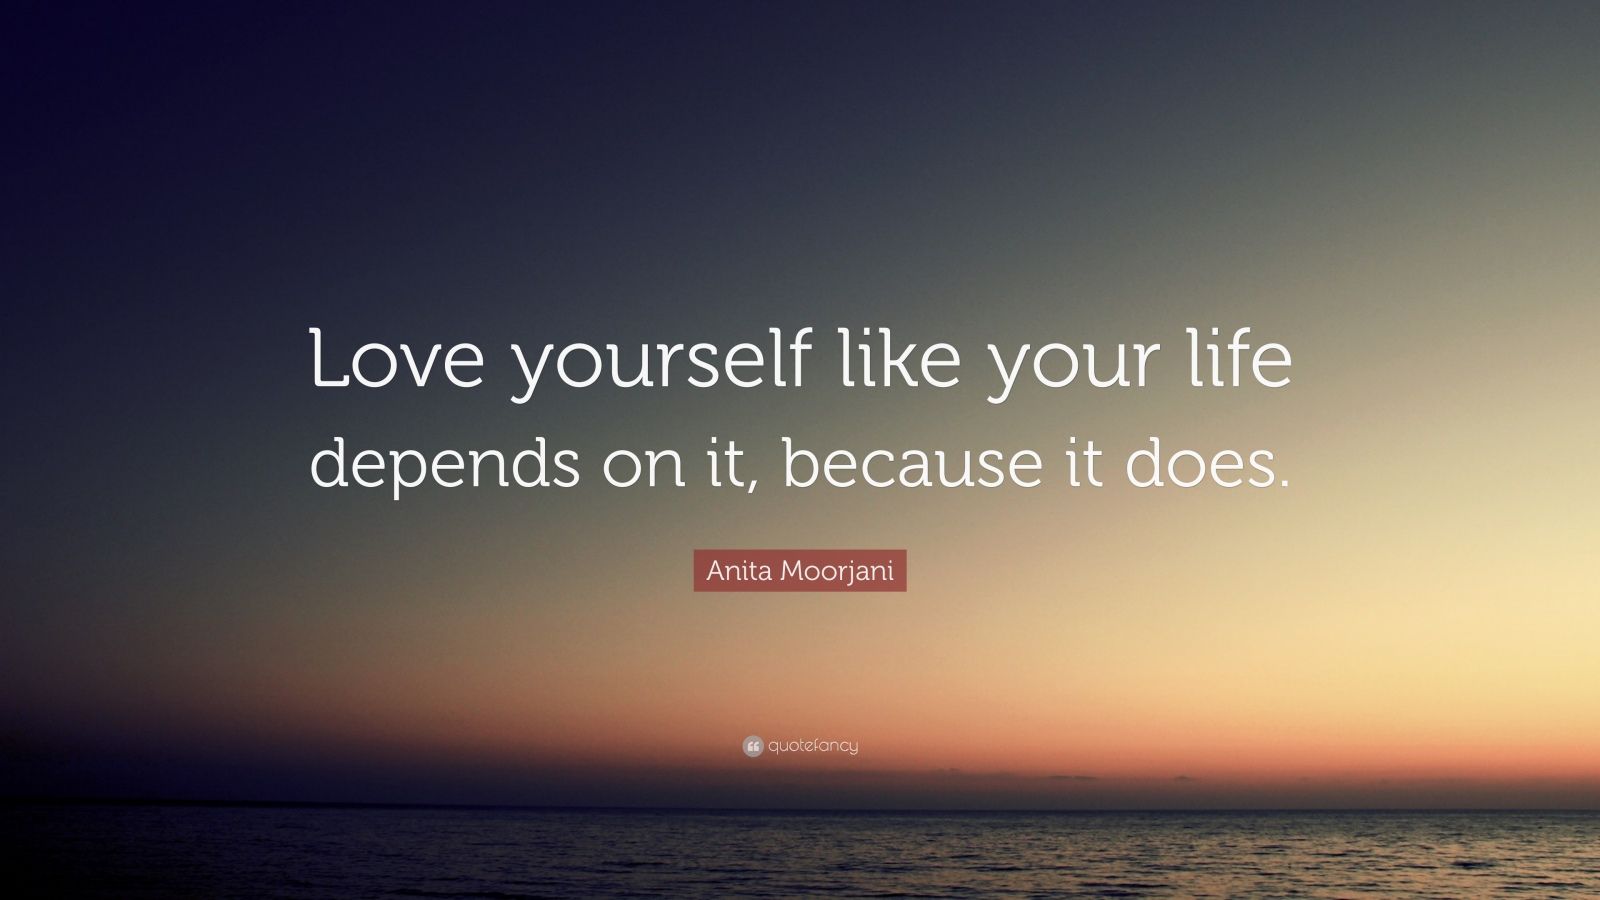 Anita Moorjani Quote: “Love yourself like your life depends on it ...